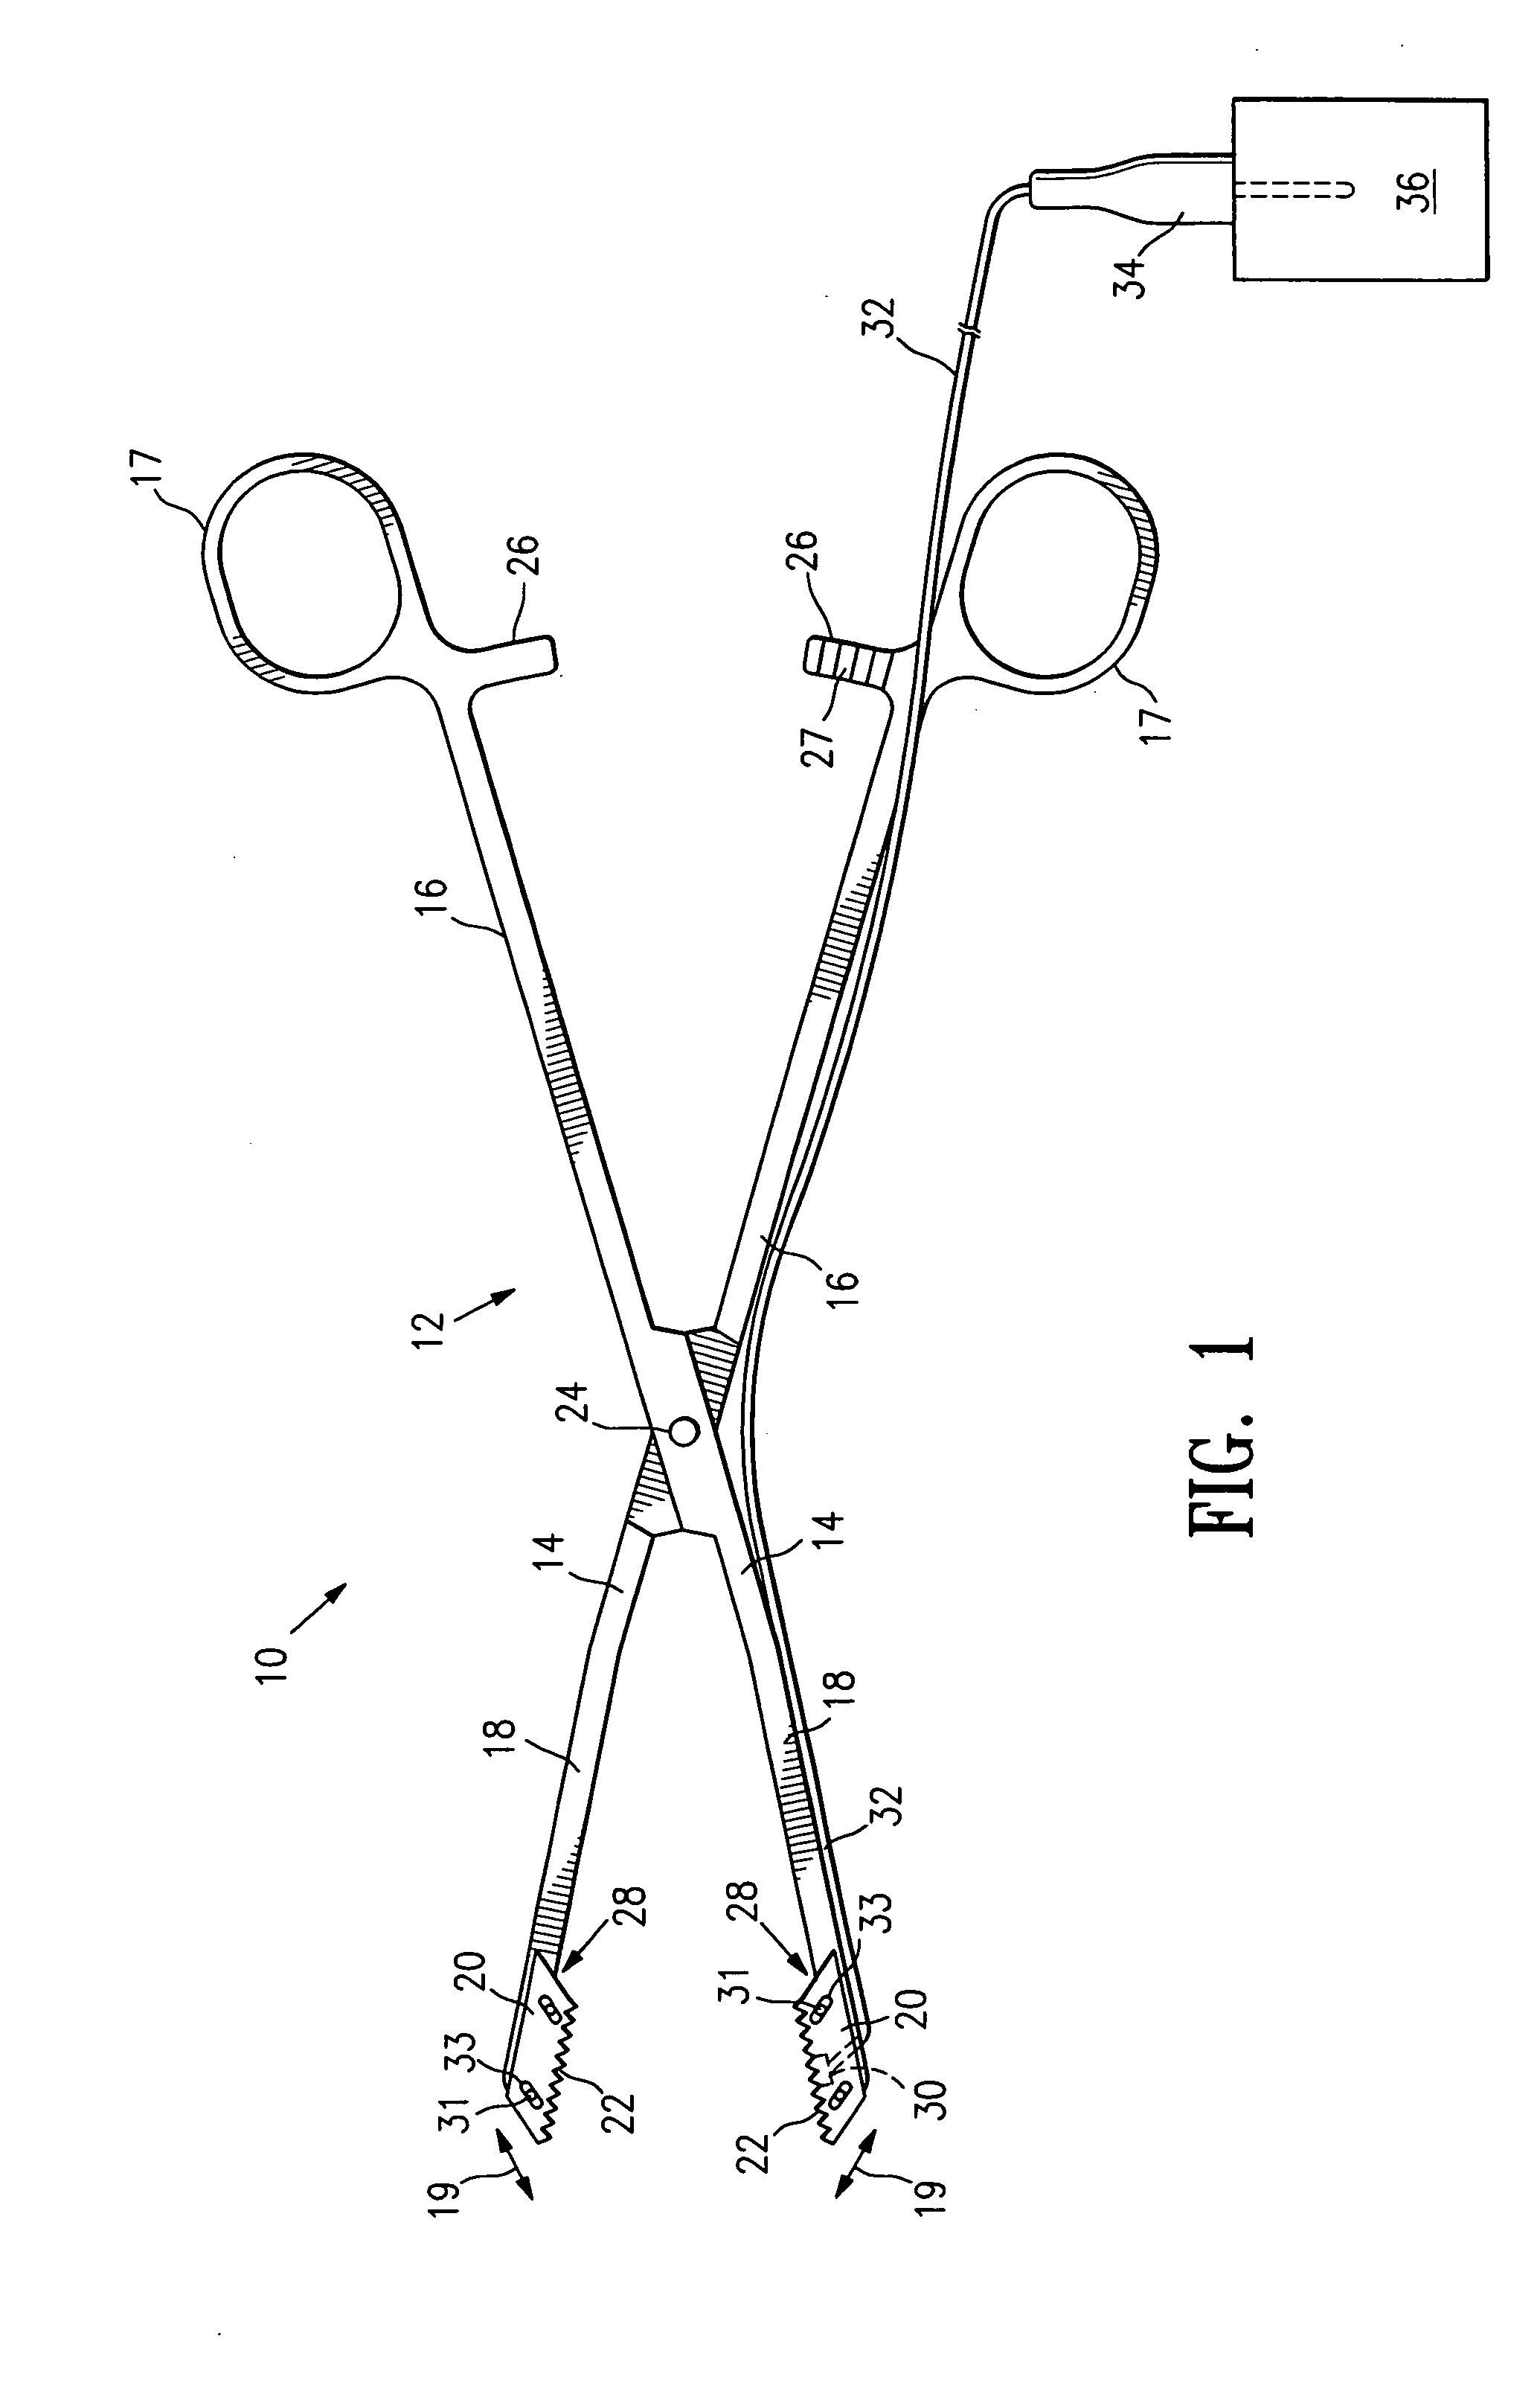 Vascular clamp for caesarian section